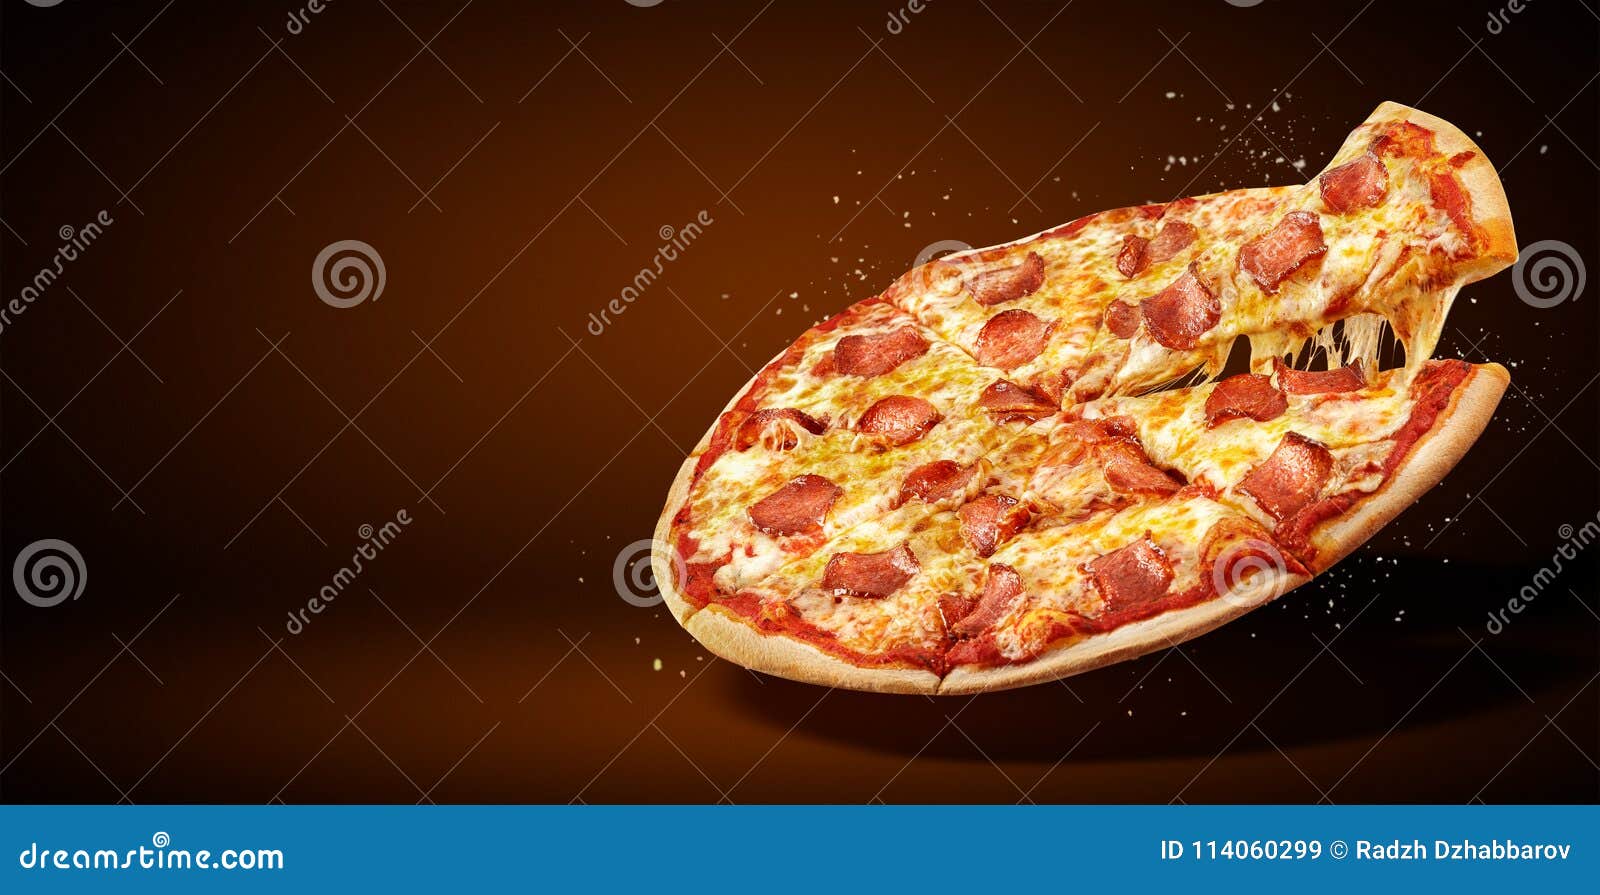 Concept Promotional Flyer And Poster For Restaurants Or Pizzerias Delicious Taste Pepperoni Pizza Stock Image Image Of Background Cuisine 114060299